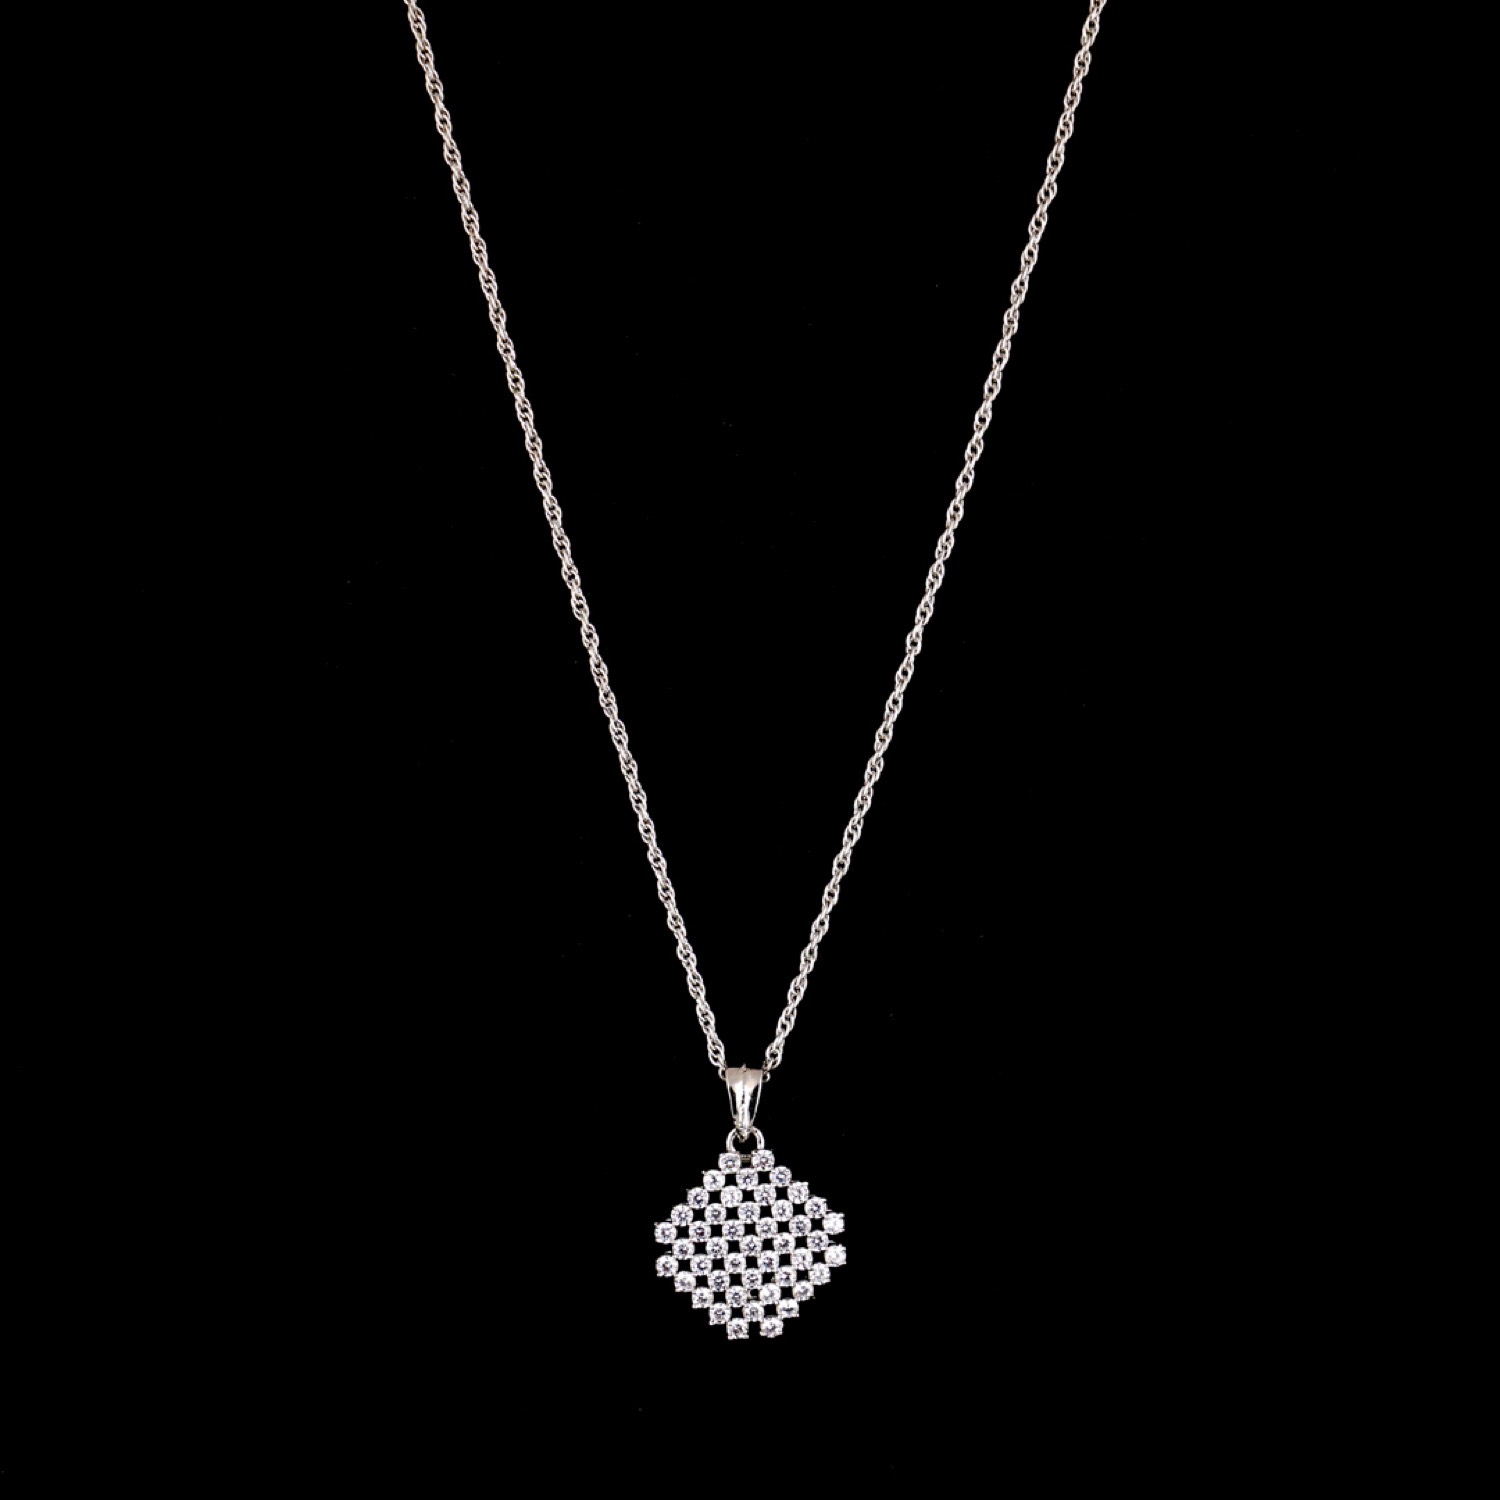 varam_chains_designer_square_charm_pendant_with_rope_silver_chain-1